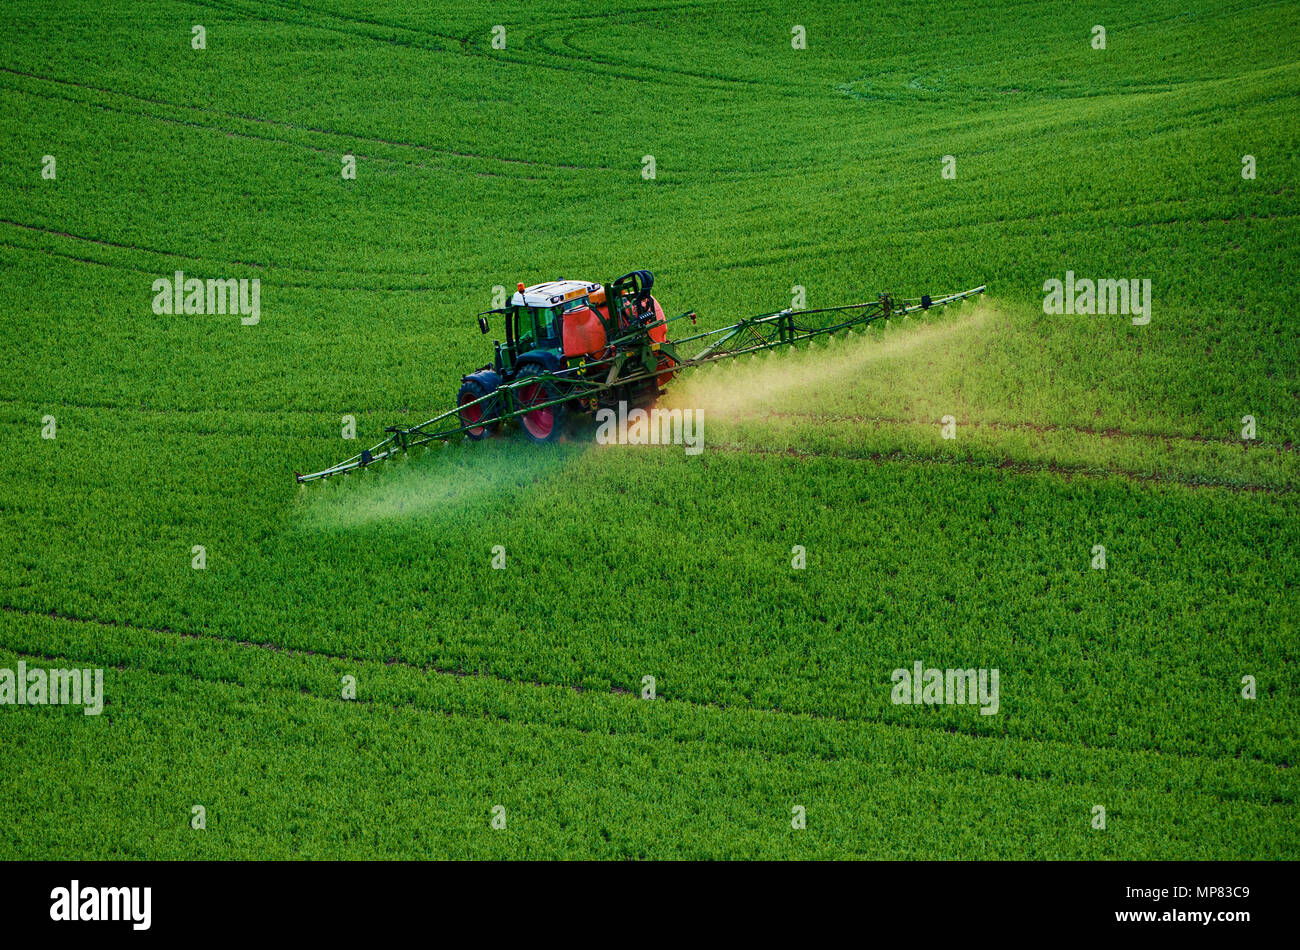 Farm machinery spraying insecticide Stock Photo